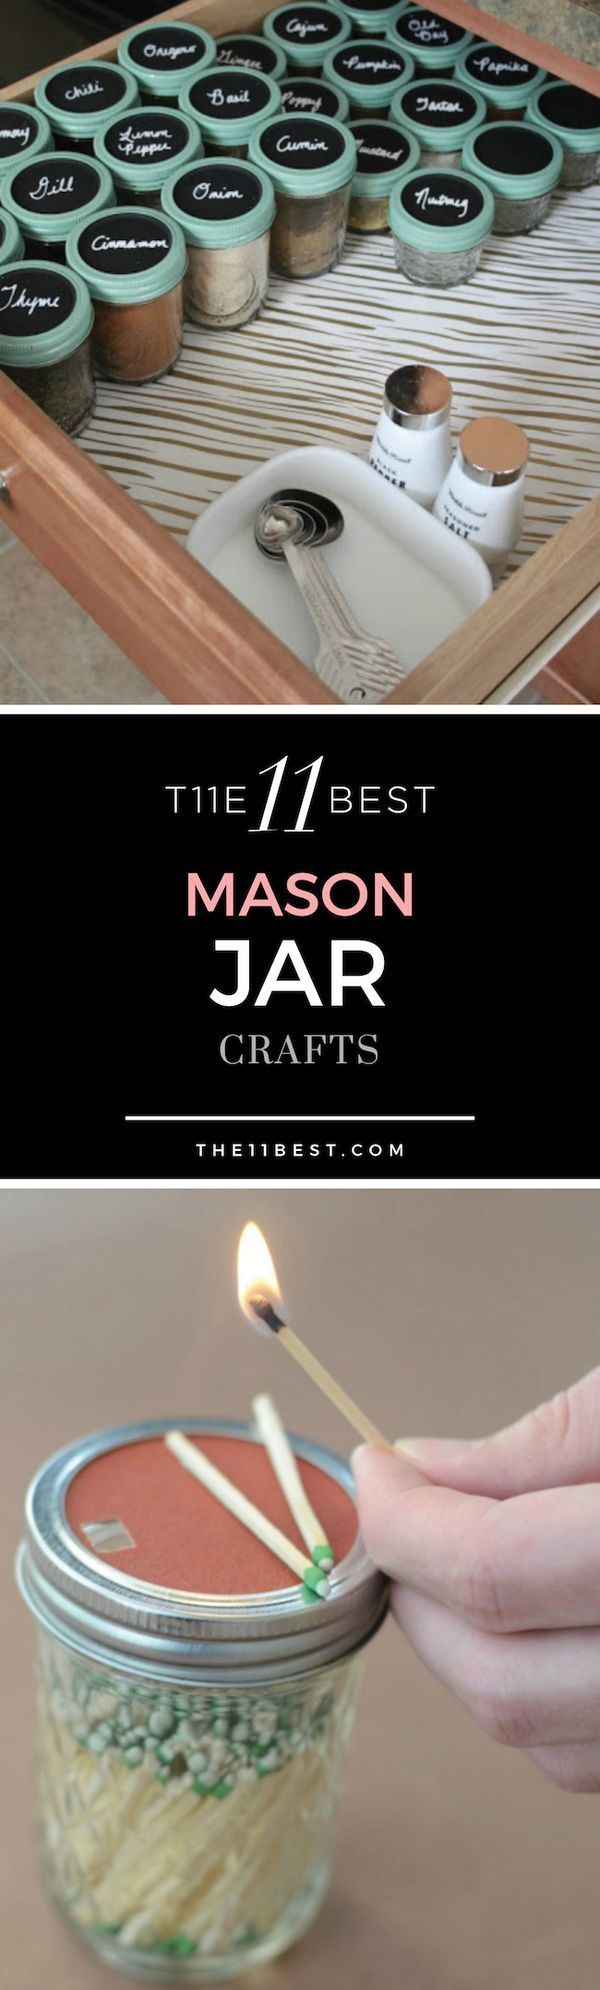 Do you love DIY crafts and projects? You’ll want to try some of these fun mason jar crafts. Some of them can even be given out as